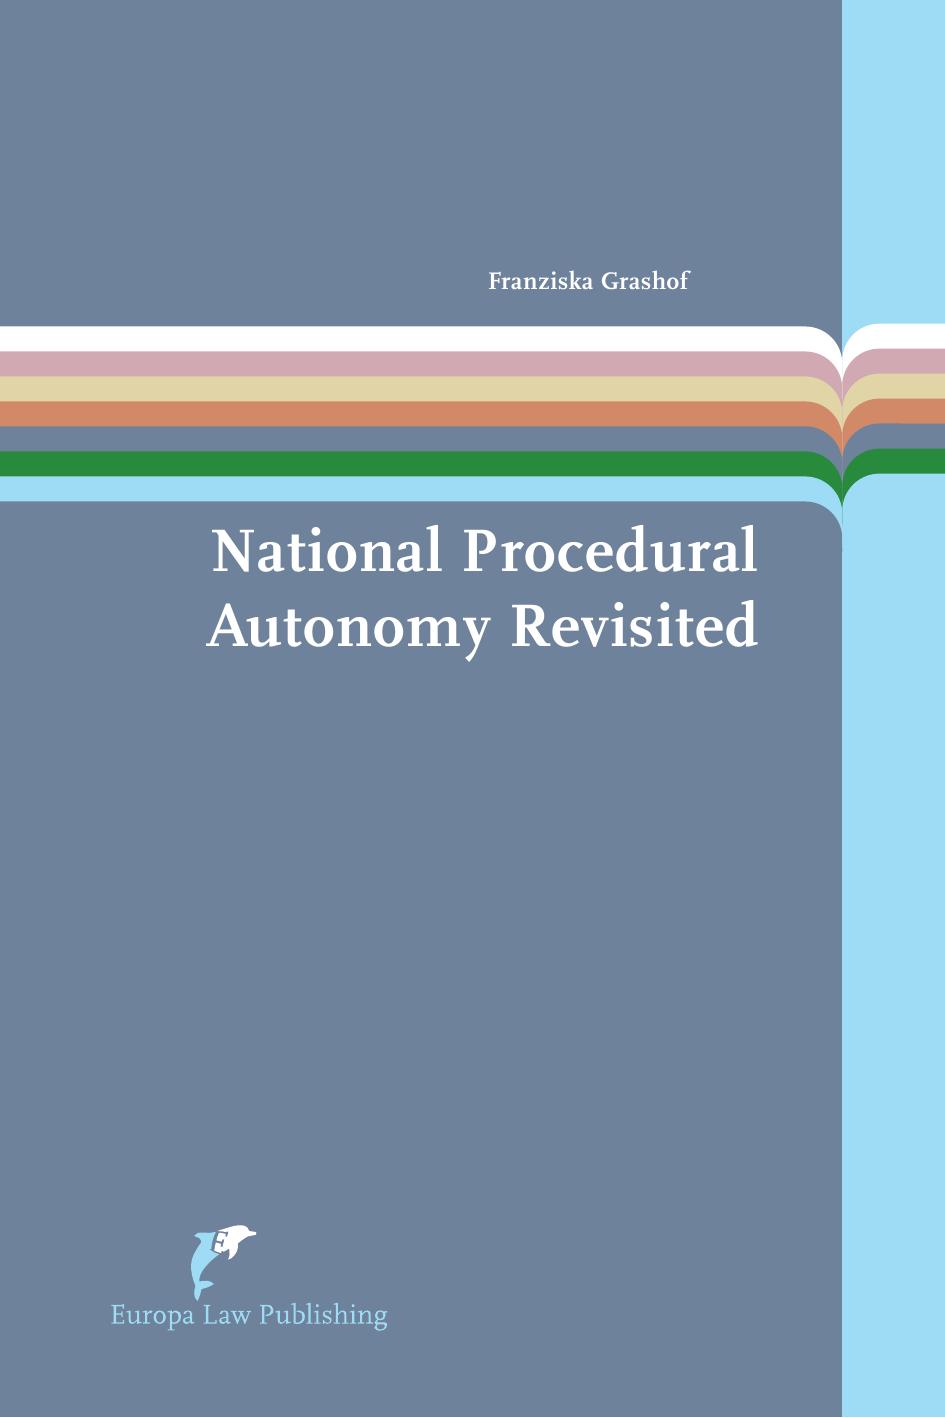 National Procedural Autonomy Revisited : Consequences of Differences in National Administrative Litigation Rules for the Enforcement of European Union Environmental Law - the Case of the EIA Directive by Franziska Grashof